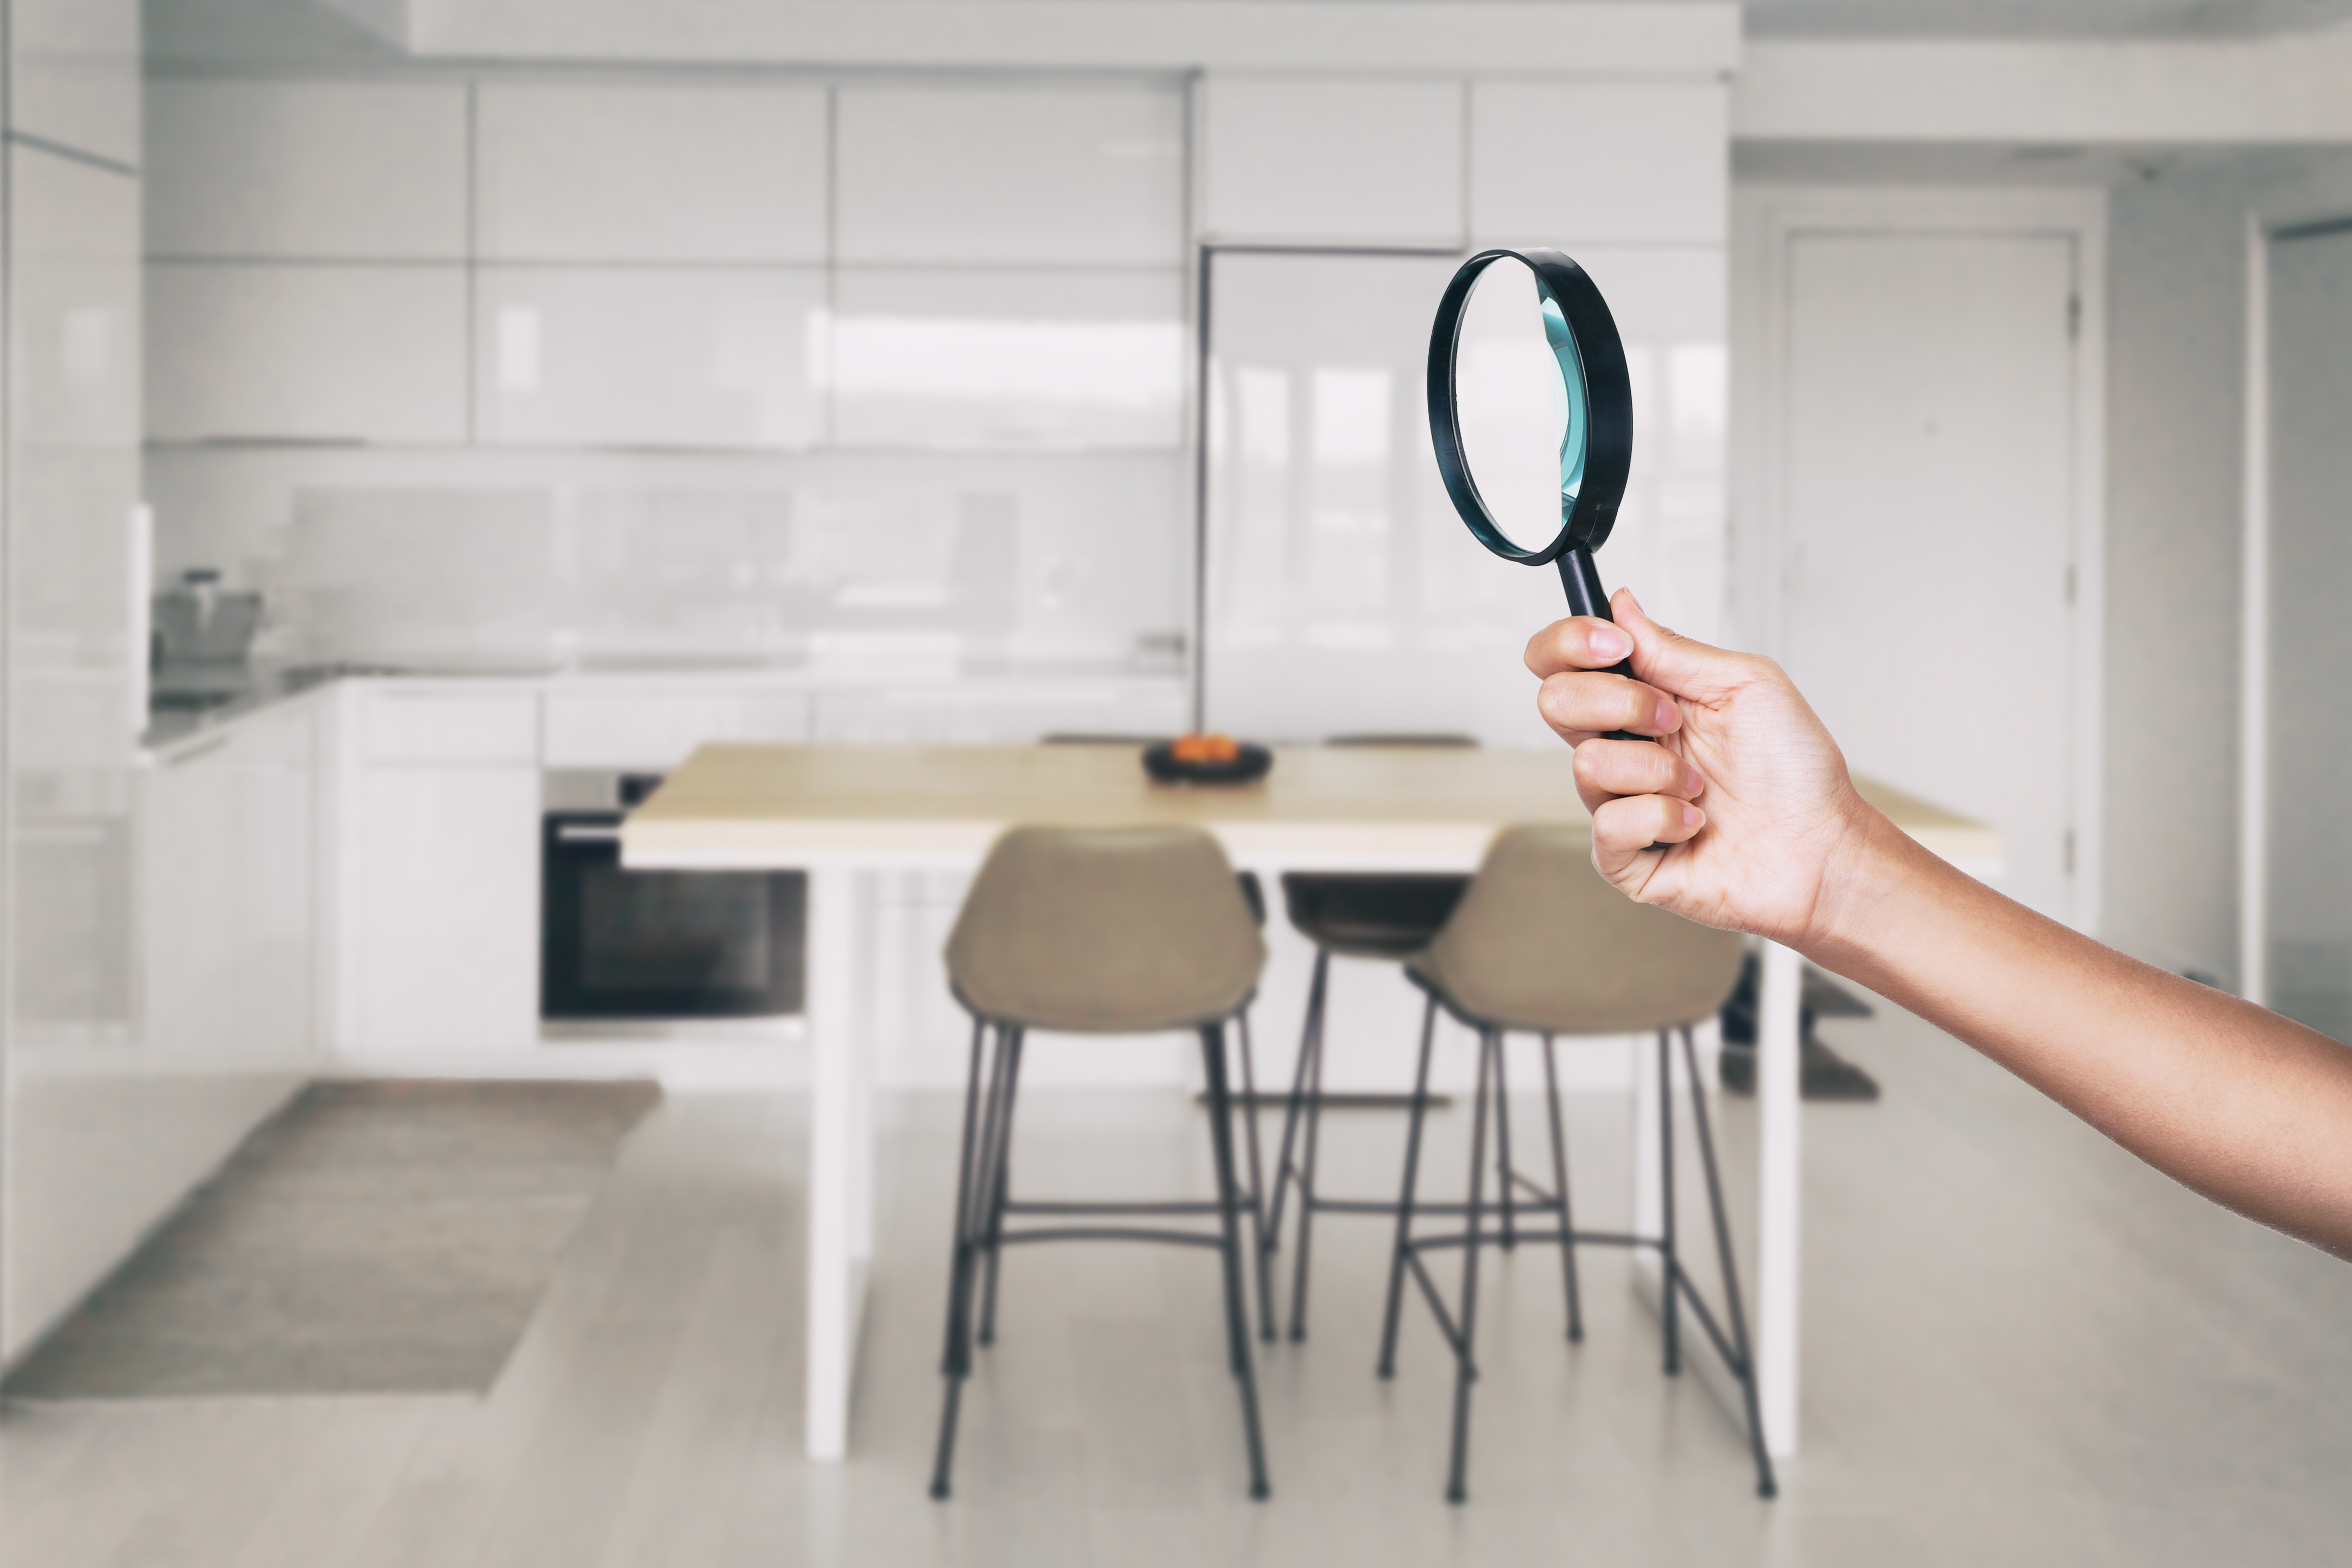 House inspection kitchen magnifying glass